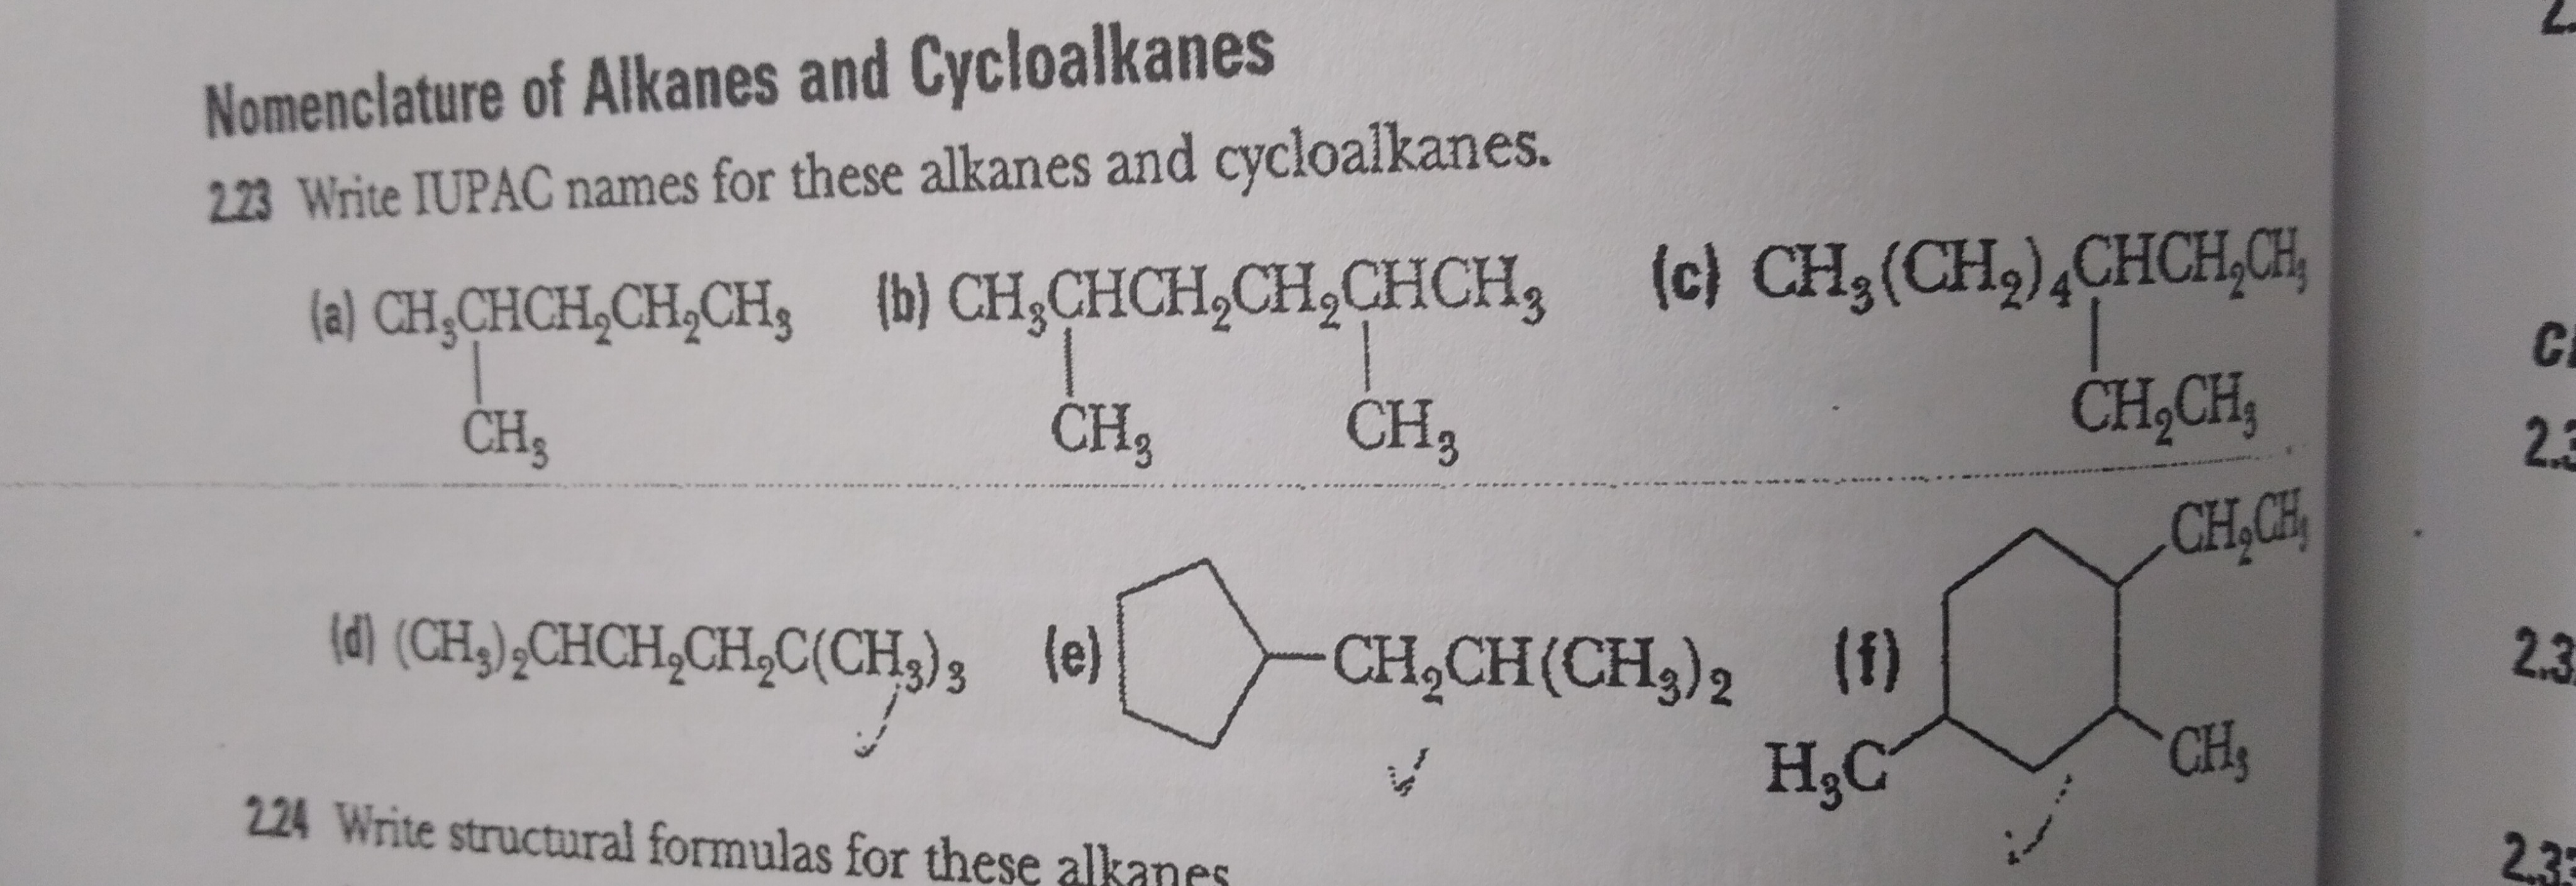 223 Write IUPAC names for these alkanes and cycloalkanes.
(c) CH3(CH2),CHCH,CH,
(a) CH¿CHCH,CH,CH, (b) CH,CHCH,CH,CHCH,
CH3
CH3
CH3
CH,CH,
